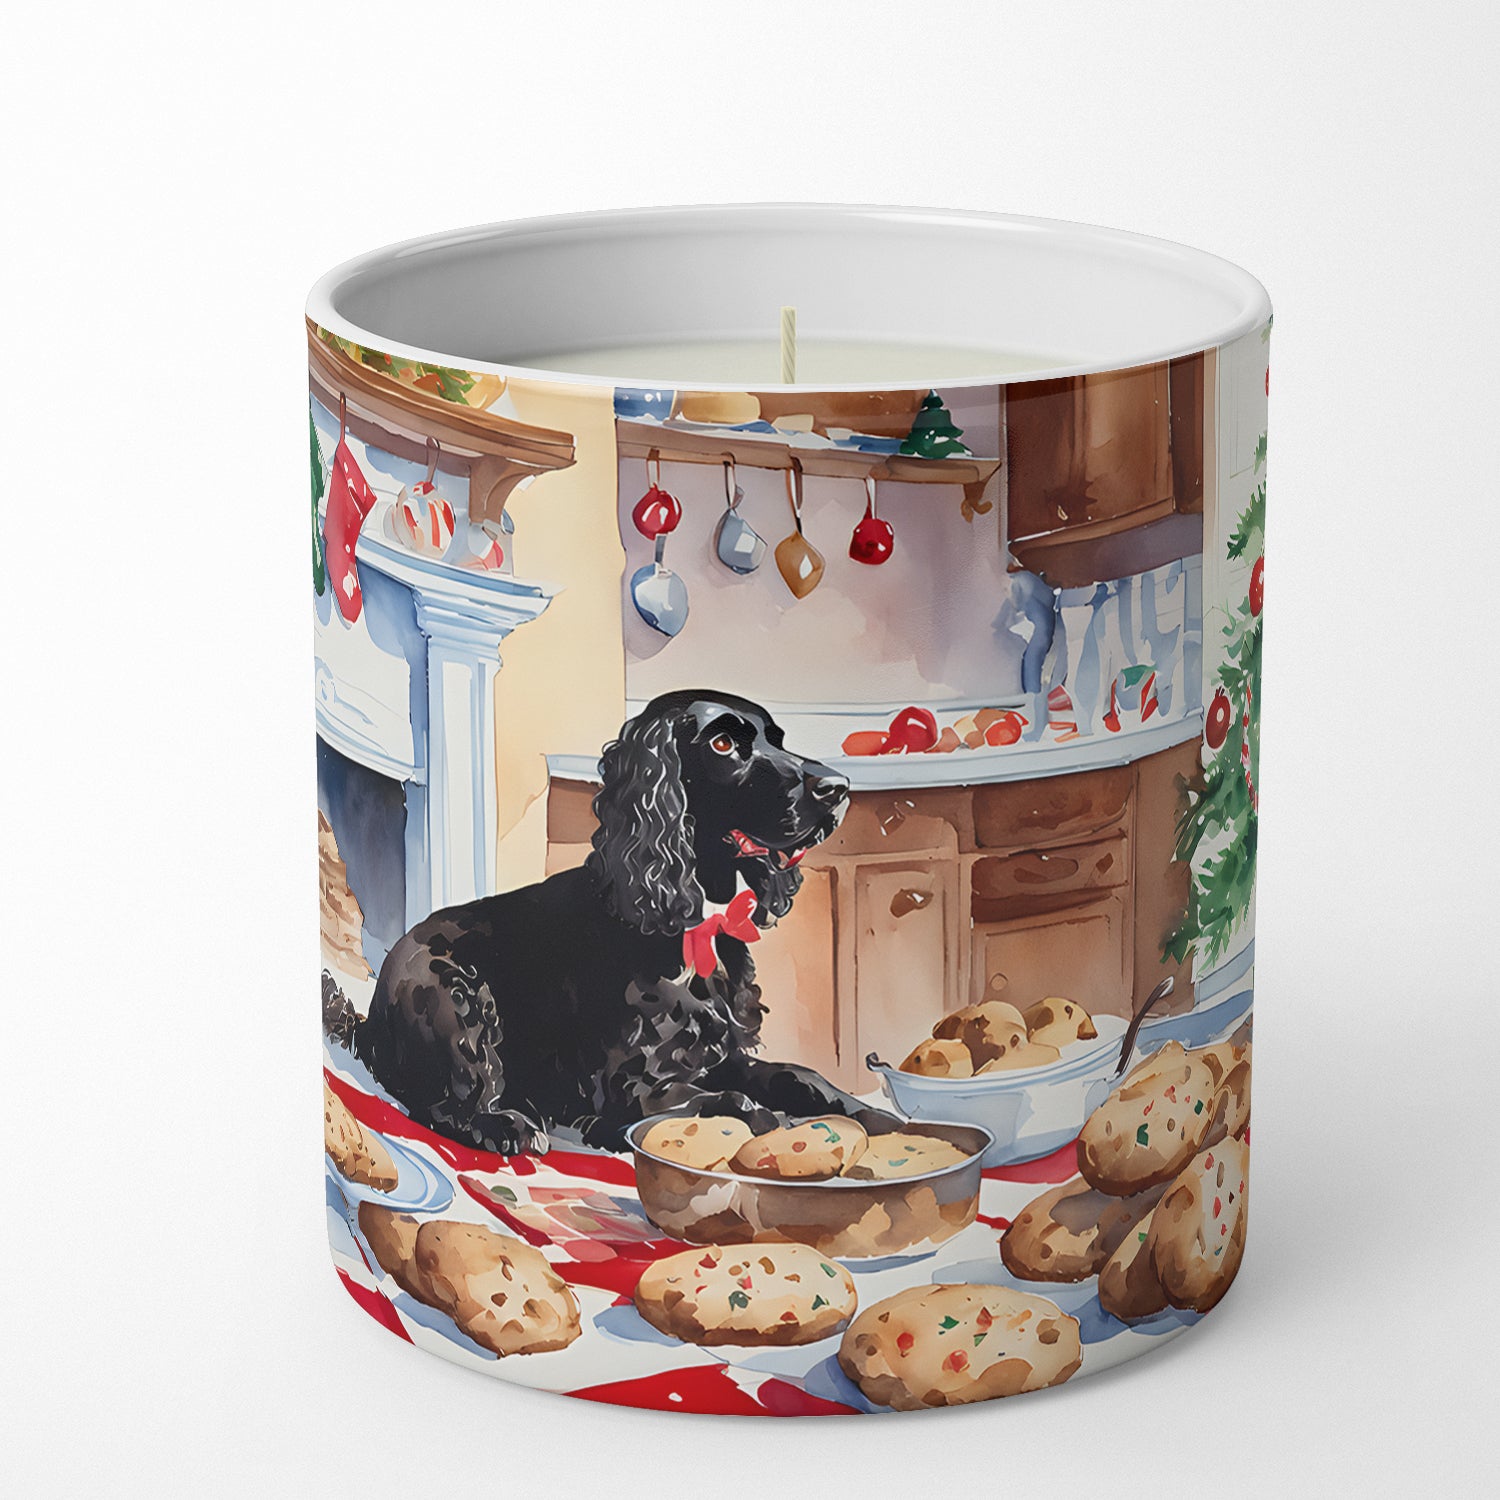 American Water Spaniel Christmas Cookies Decorative Soy Candle